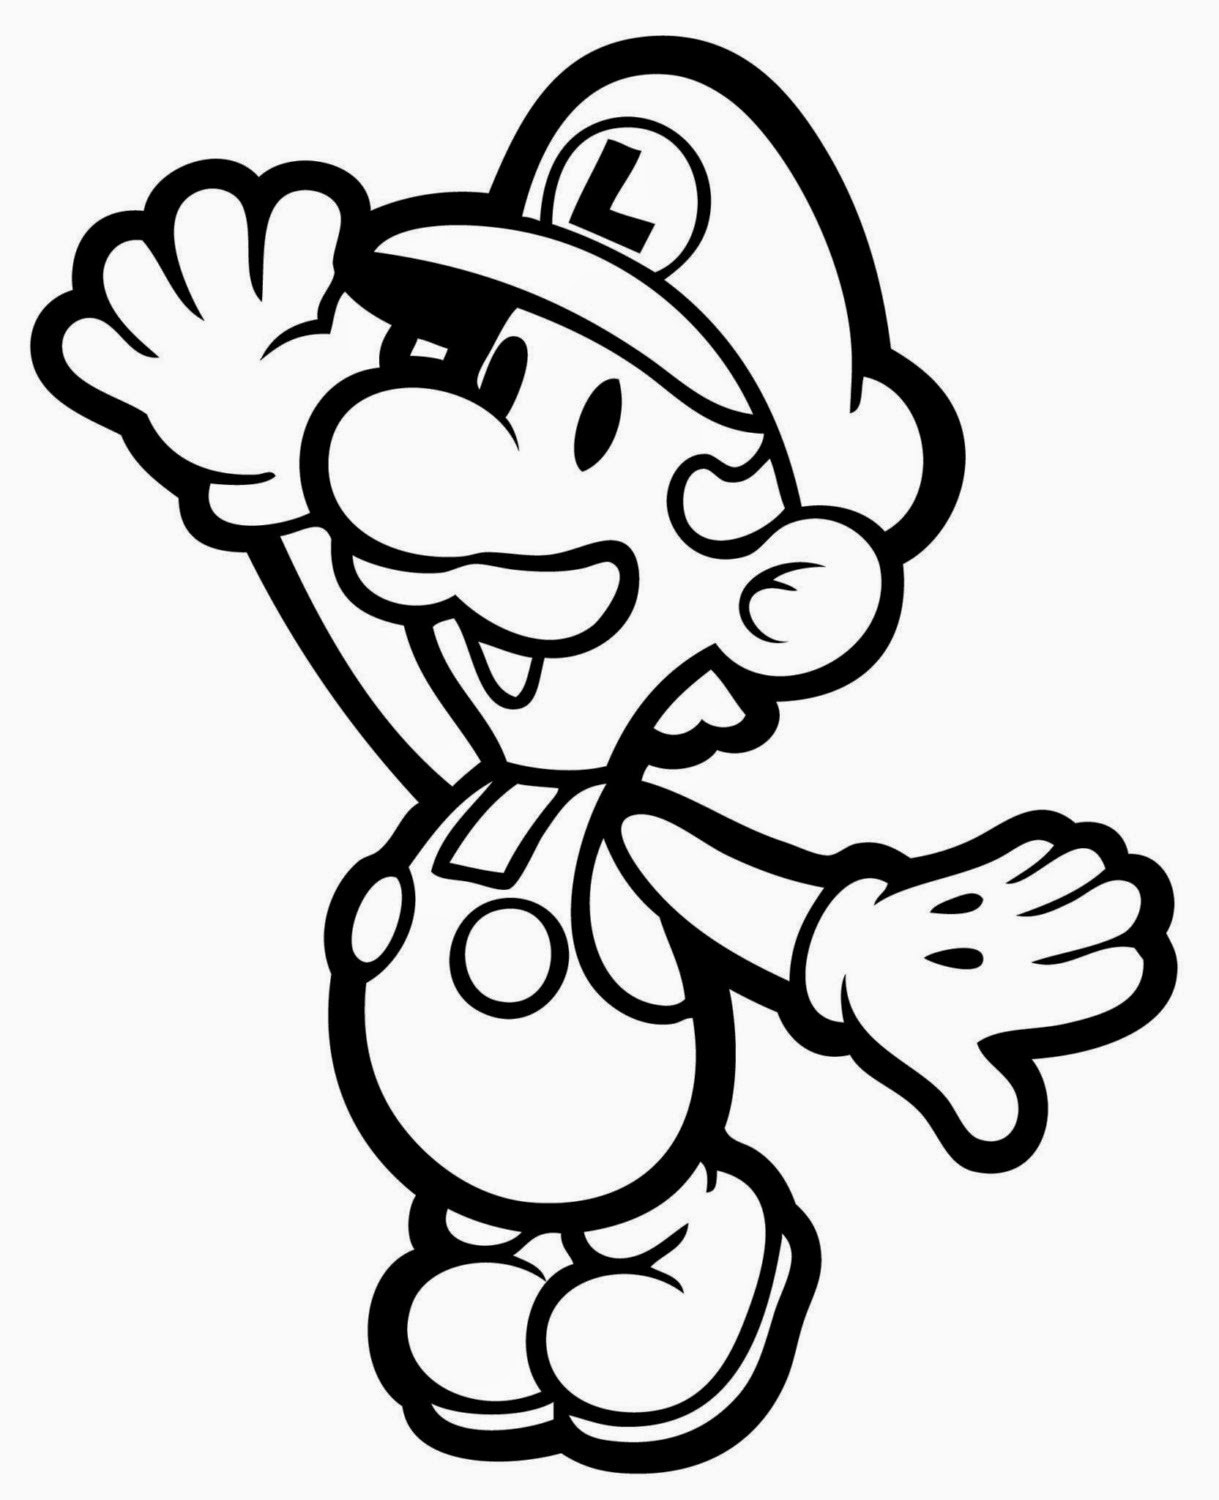 Mario Coloring Pages Printable Free
 Coloring Pages Mario Coloring Pages Free and Printable